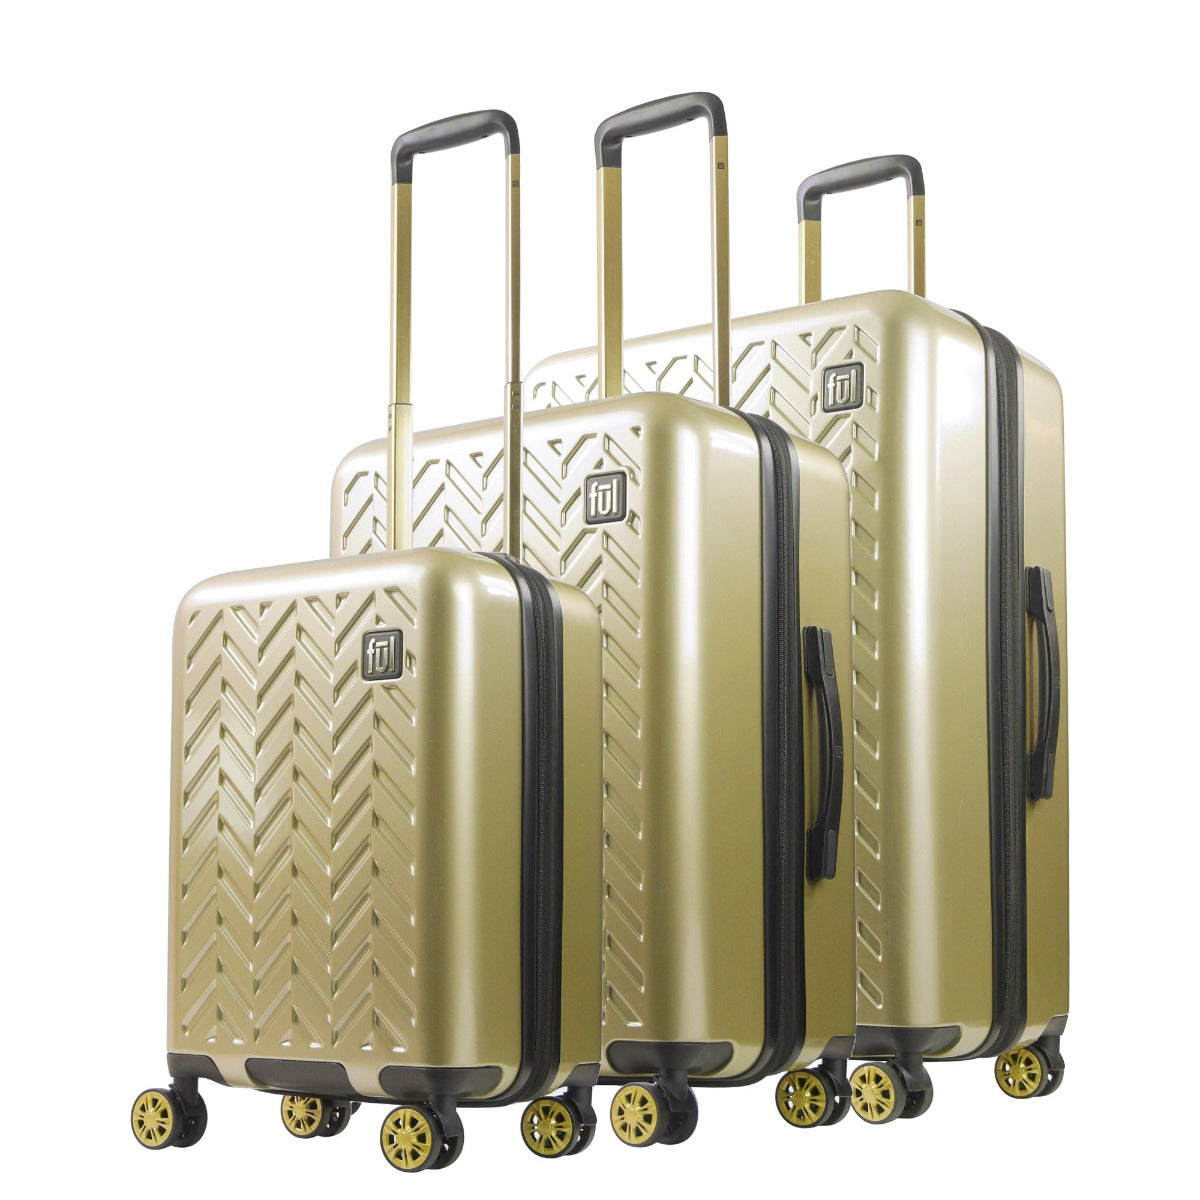 Ful Groove hardside spinner suitcases 3 piece gold luggage set 22" 27" 31"